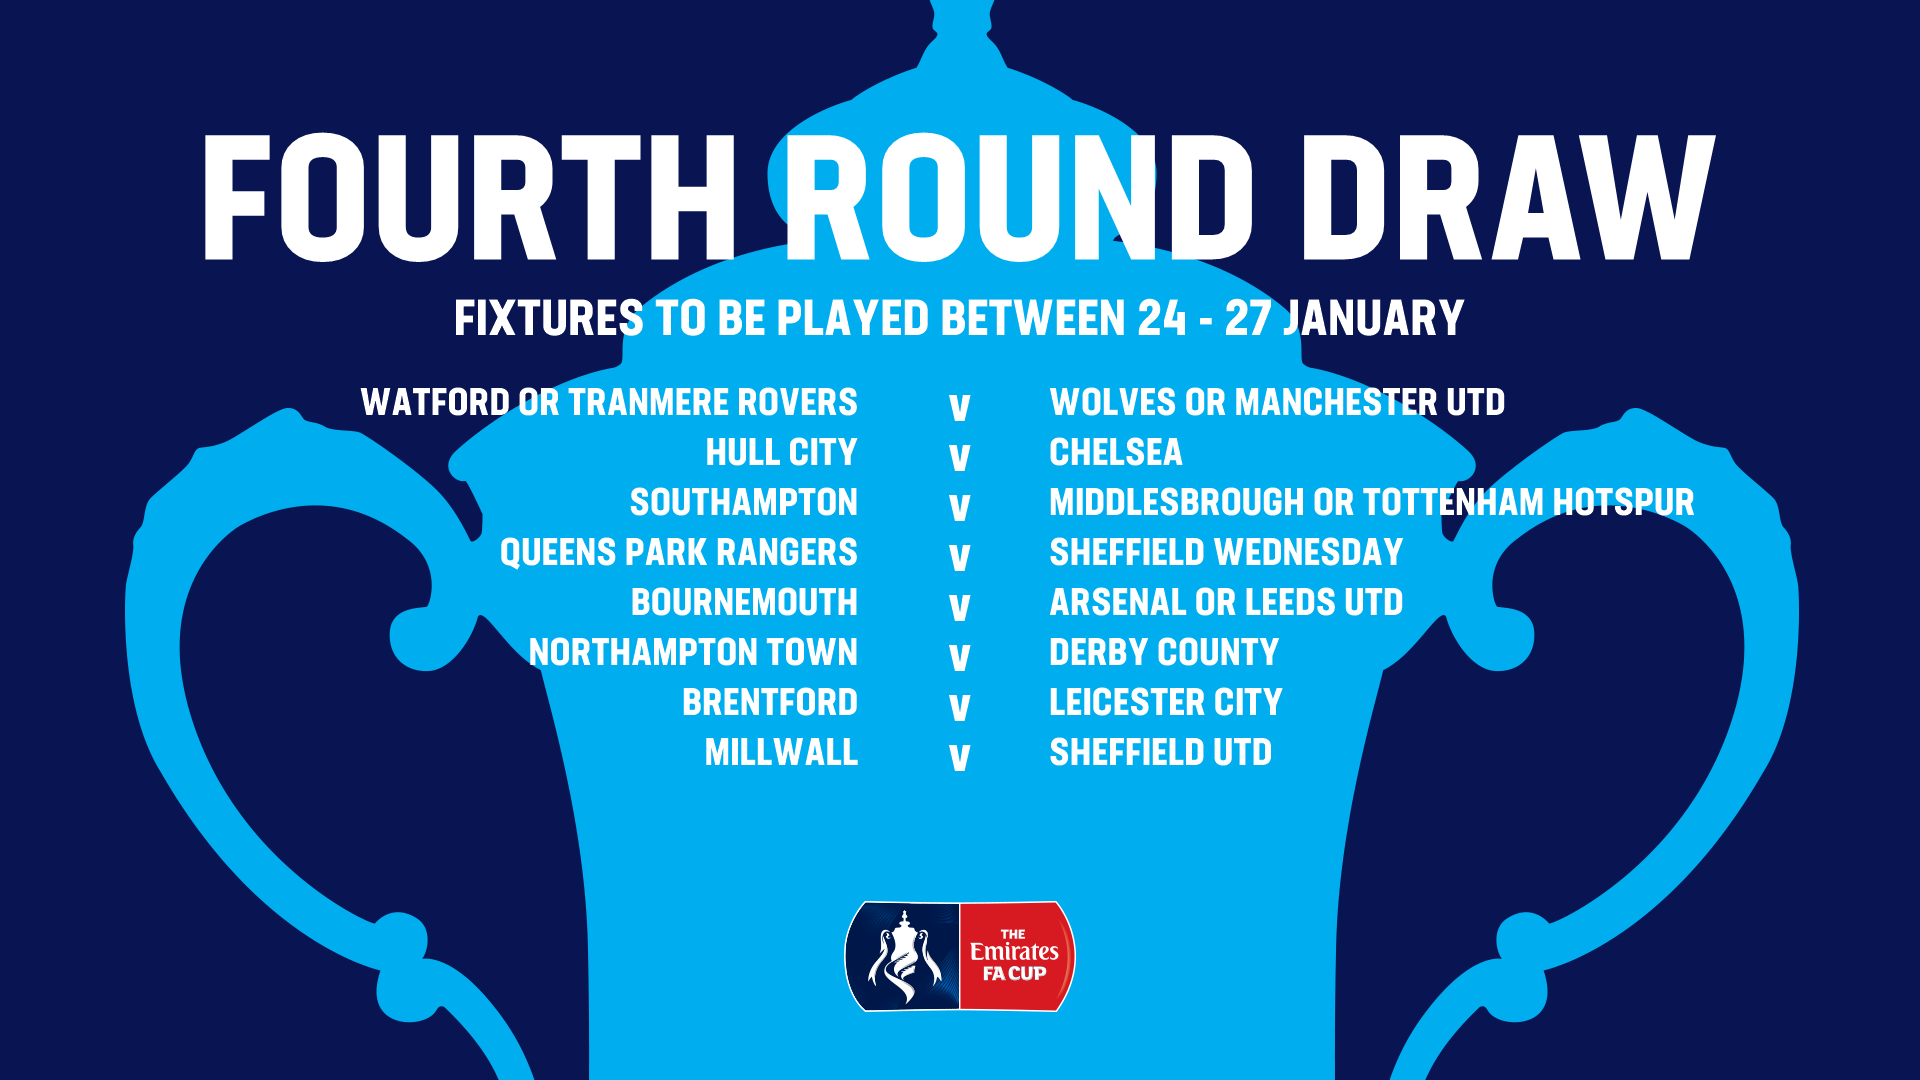 Emirates Fa Cup On Twitter Here Are Your Emiratesfacup Fourth Round Fixtures A Thread 1 2